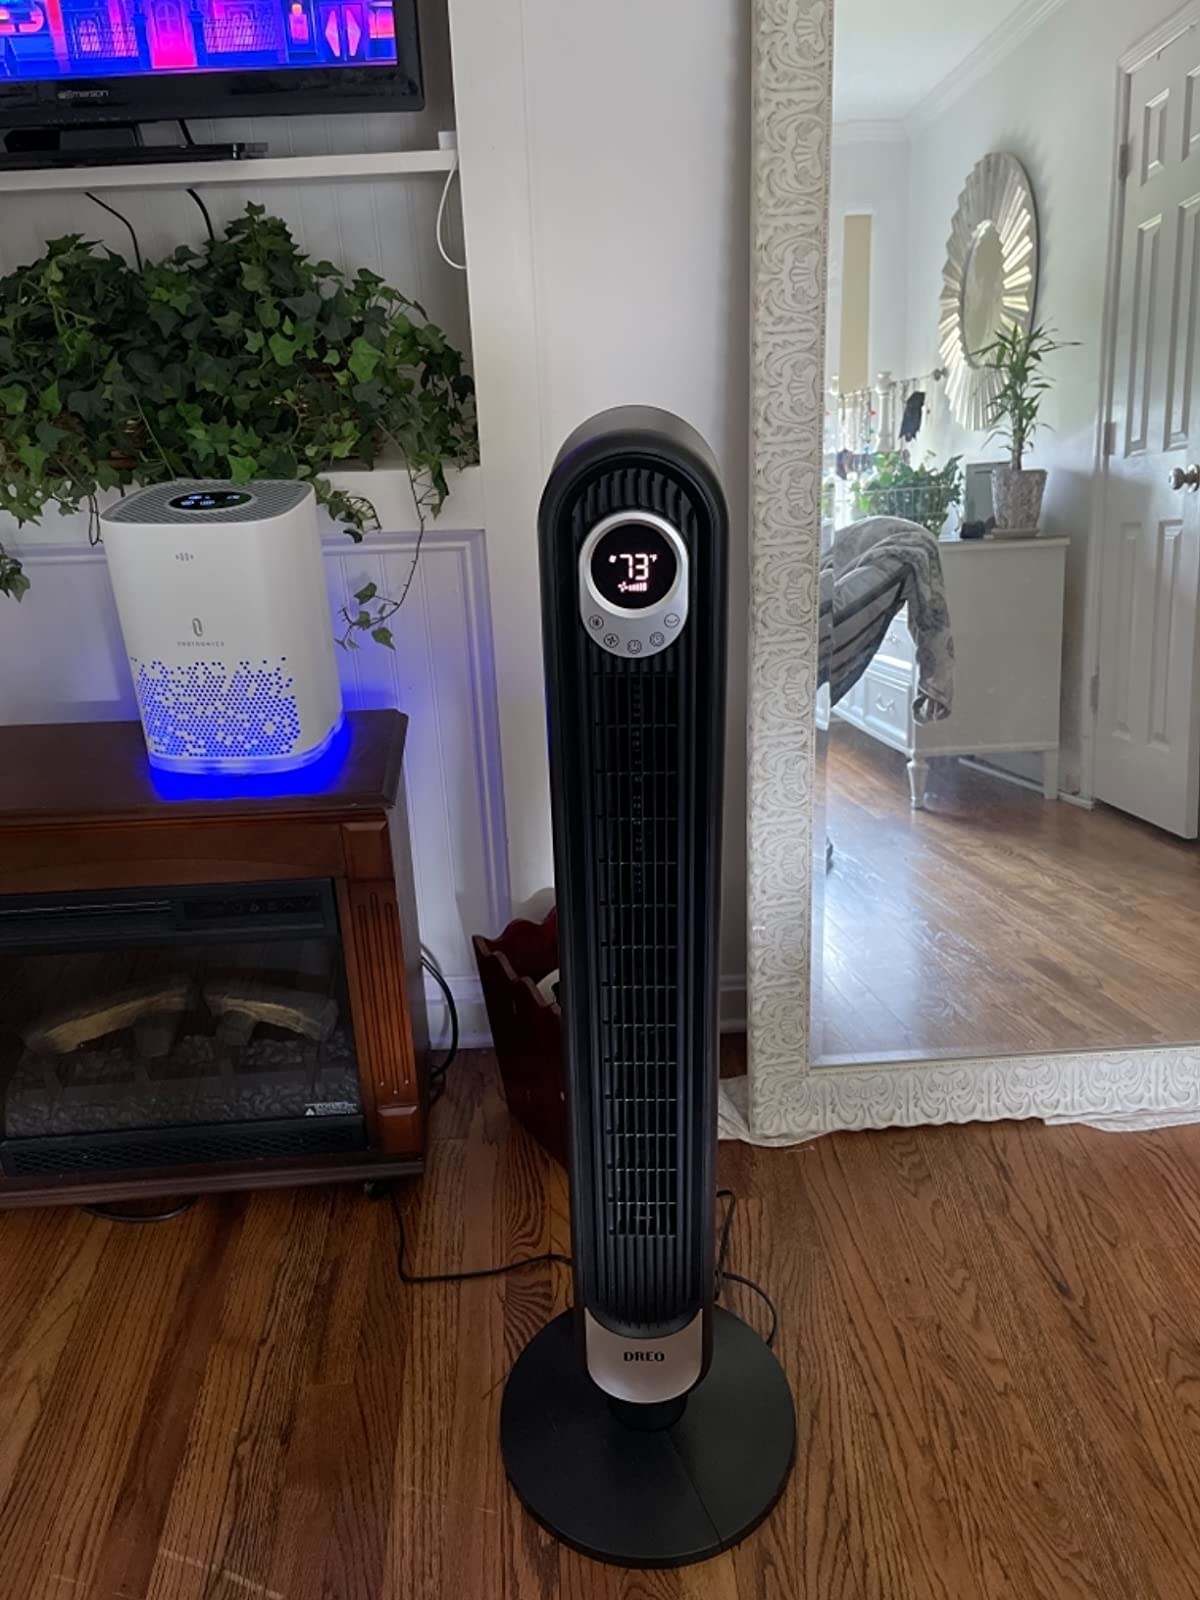 A reviewer's narrow black fan with a temperature reading of 73 on the led screen